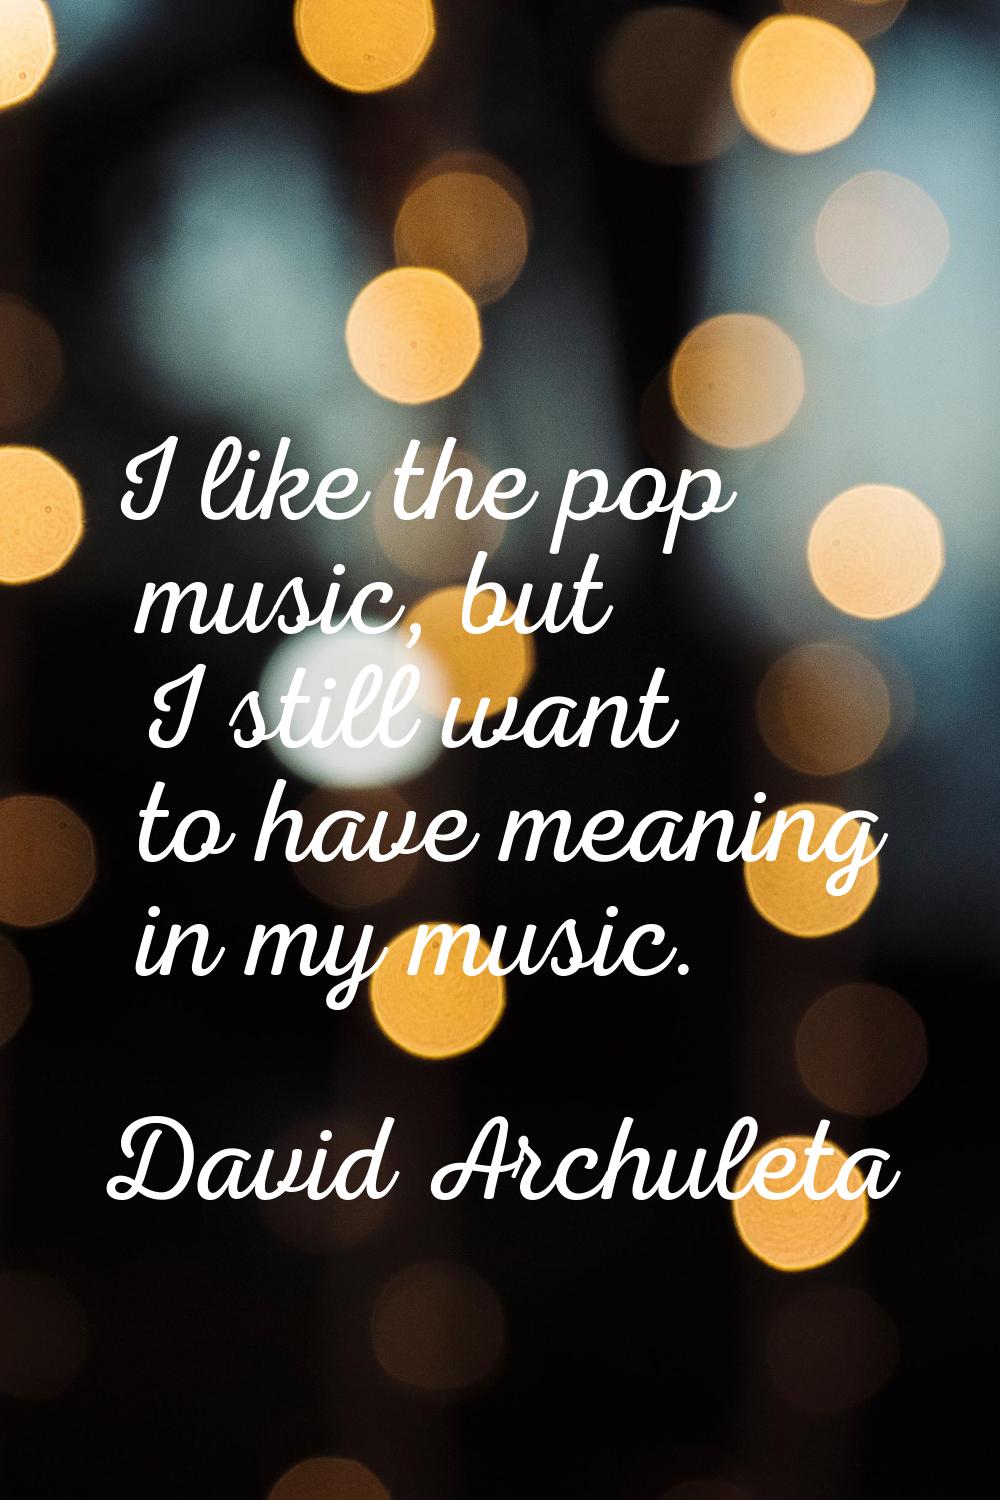 I like the pop music, but I still want to have meaning in my music.